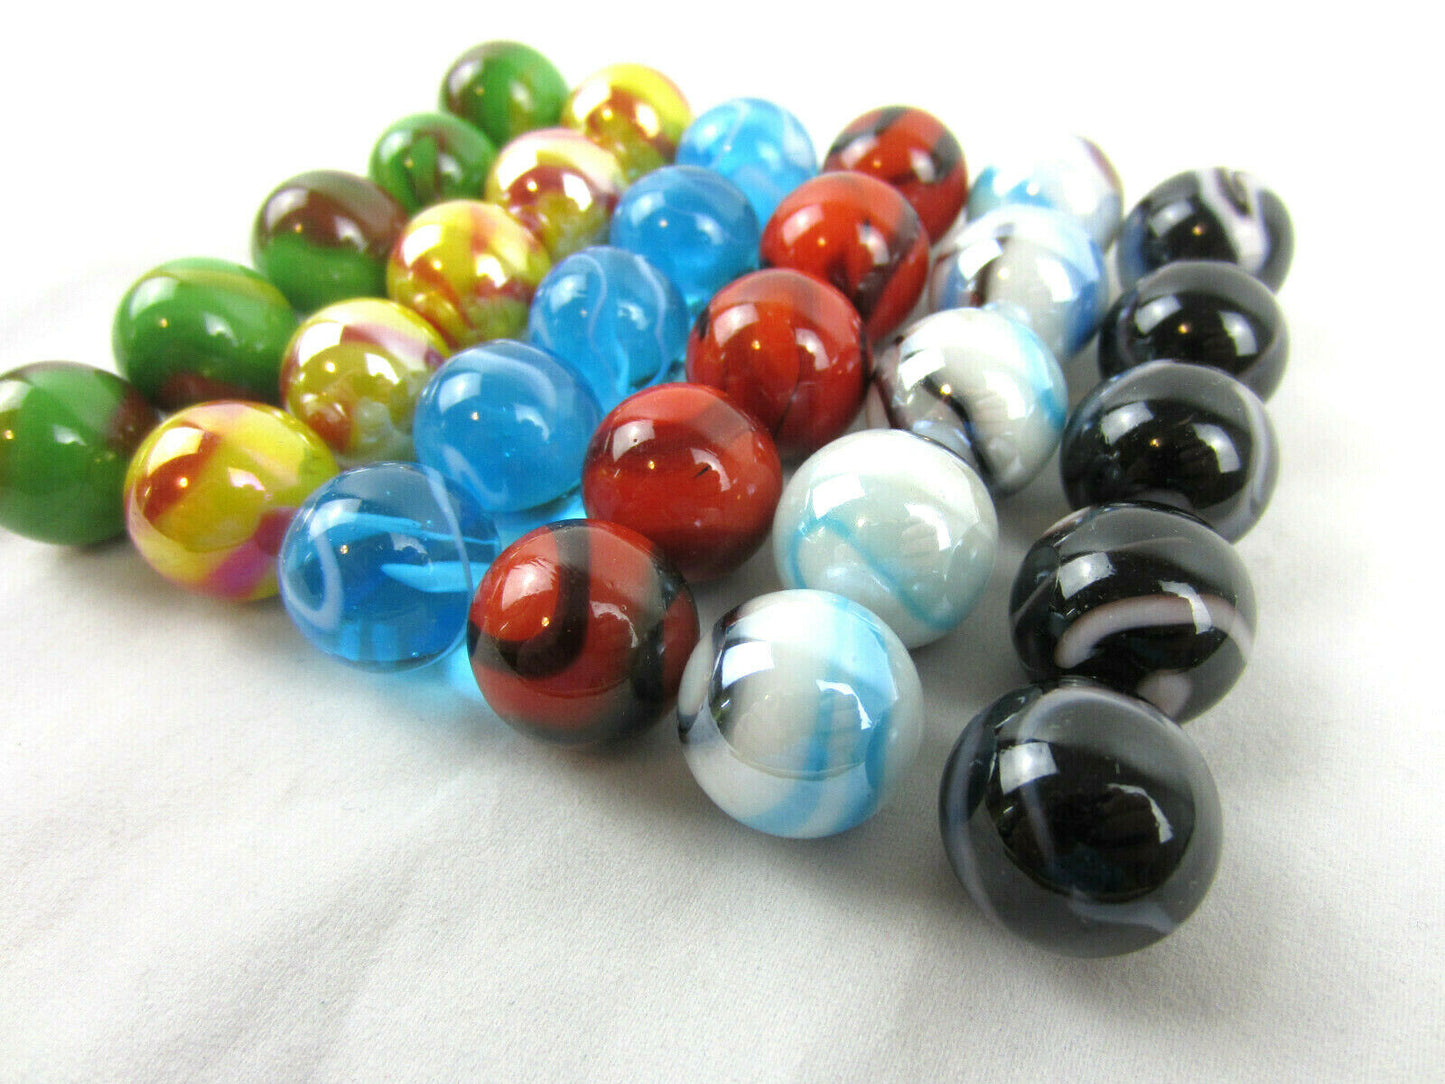 Big Game Toys 30pc Deluxe 16mm Glass Replacement Marbles